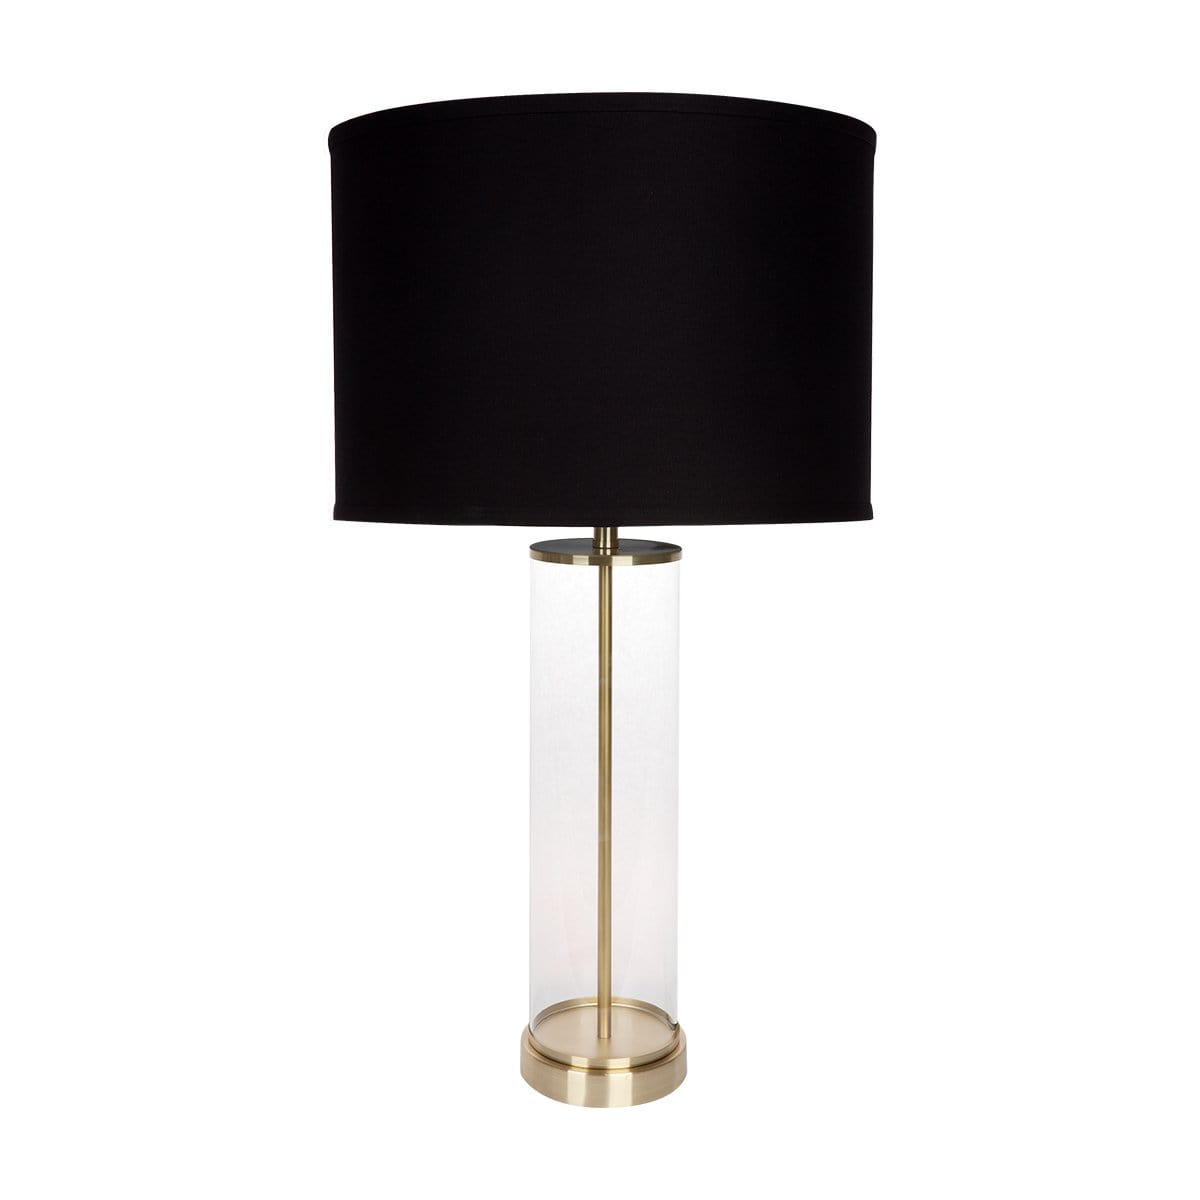 CAFE LIGHTING & LIVING Table Lamp East Side Table Lamp - Brass with Black Shade 12376